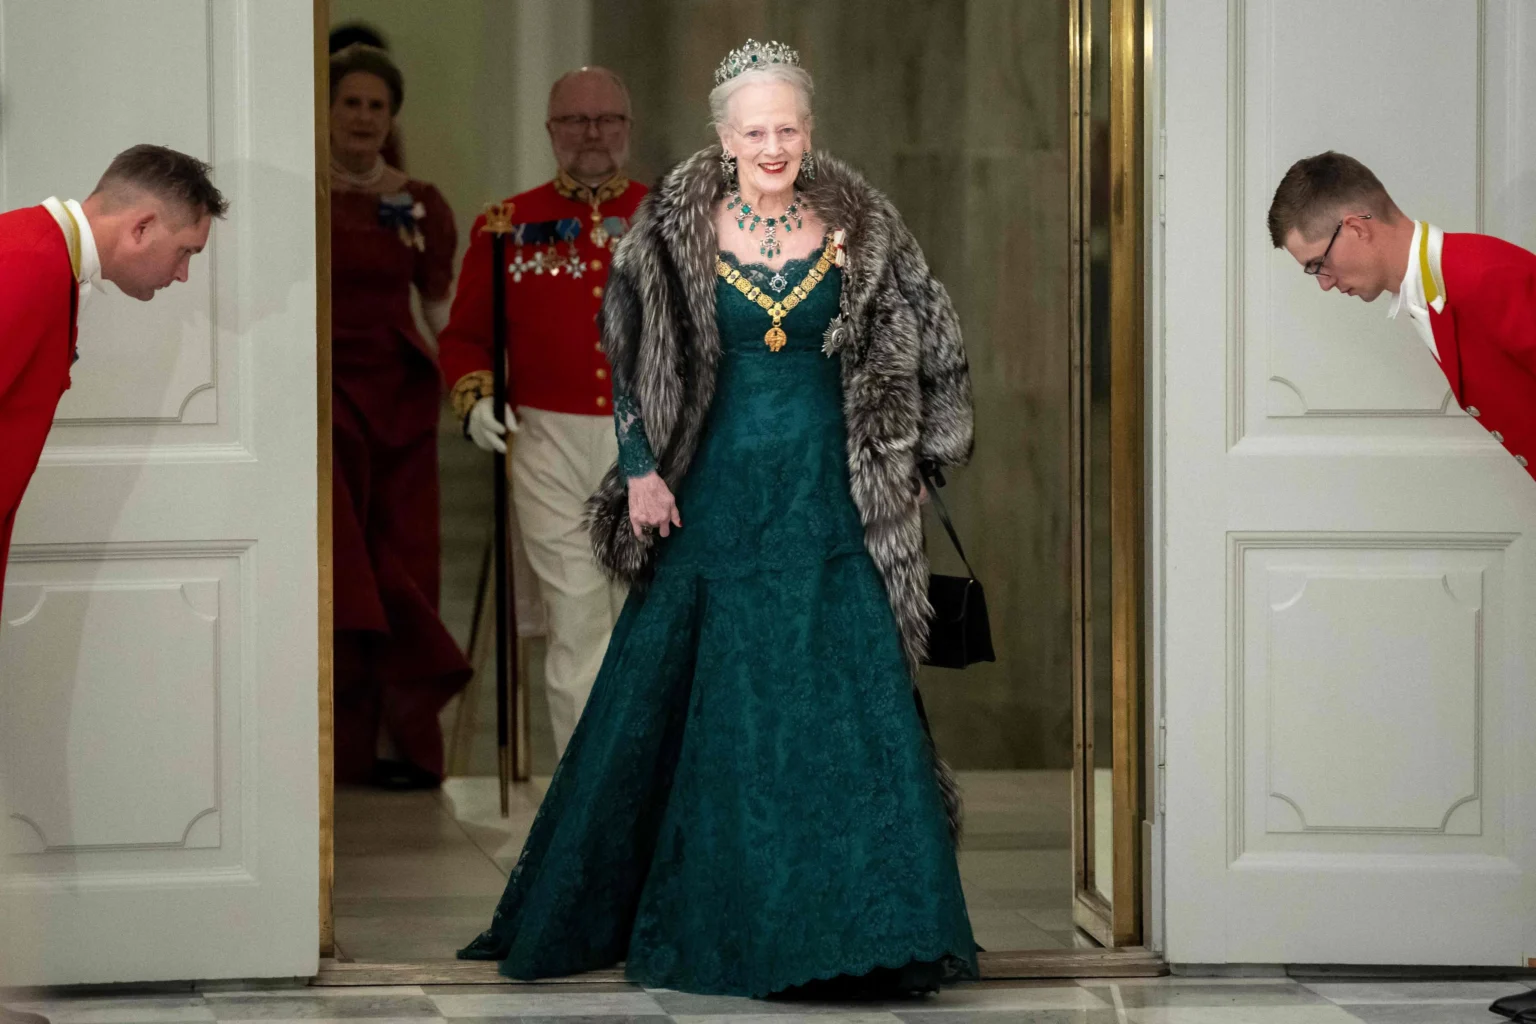 denmarks-queen-margrethe-ii-announced-to-abdicate-the-throne-after-52-years